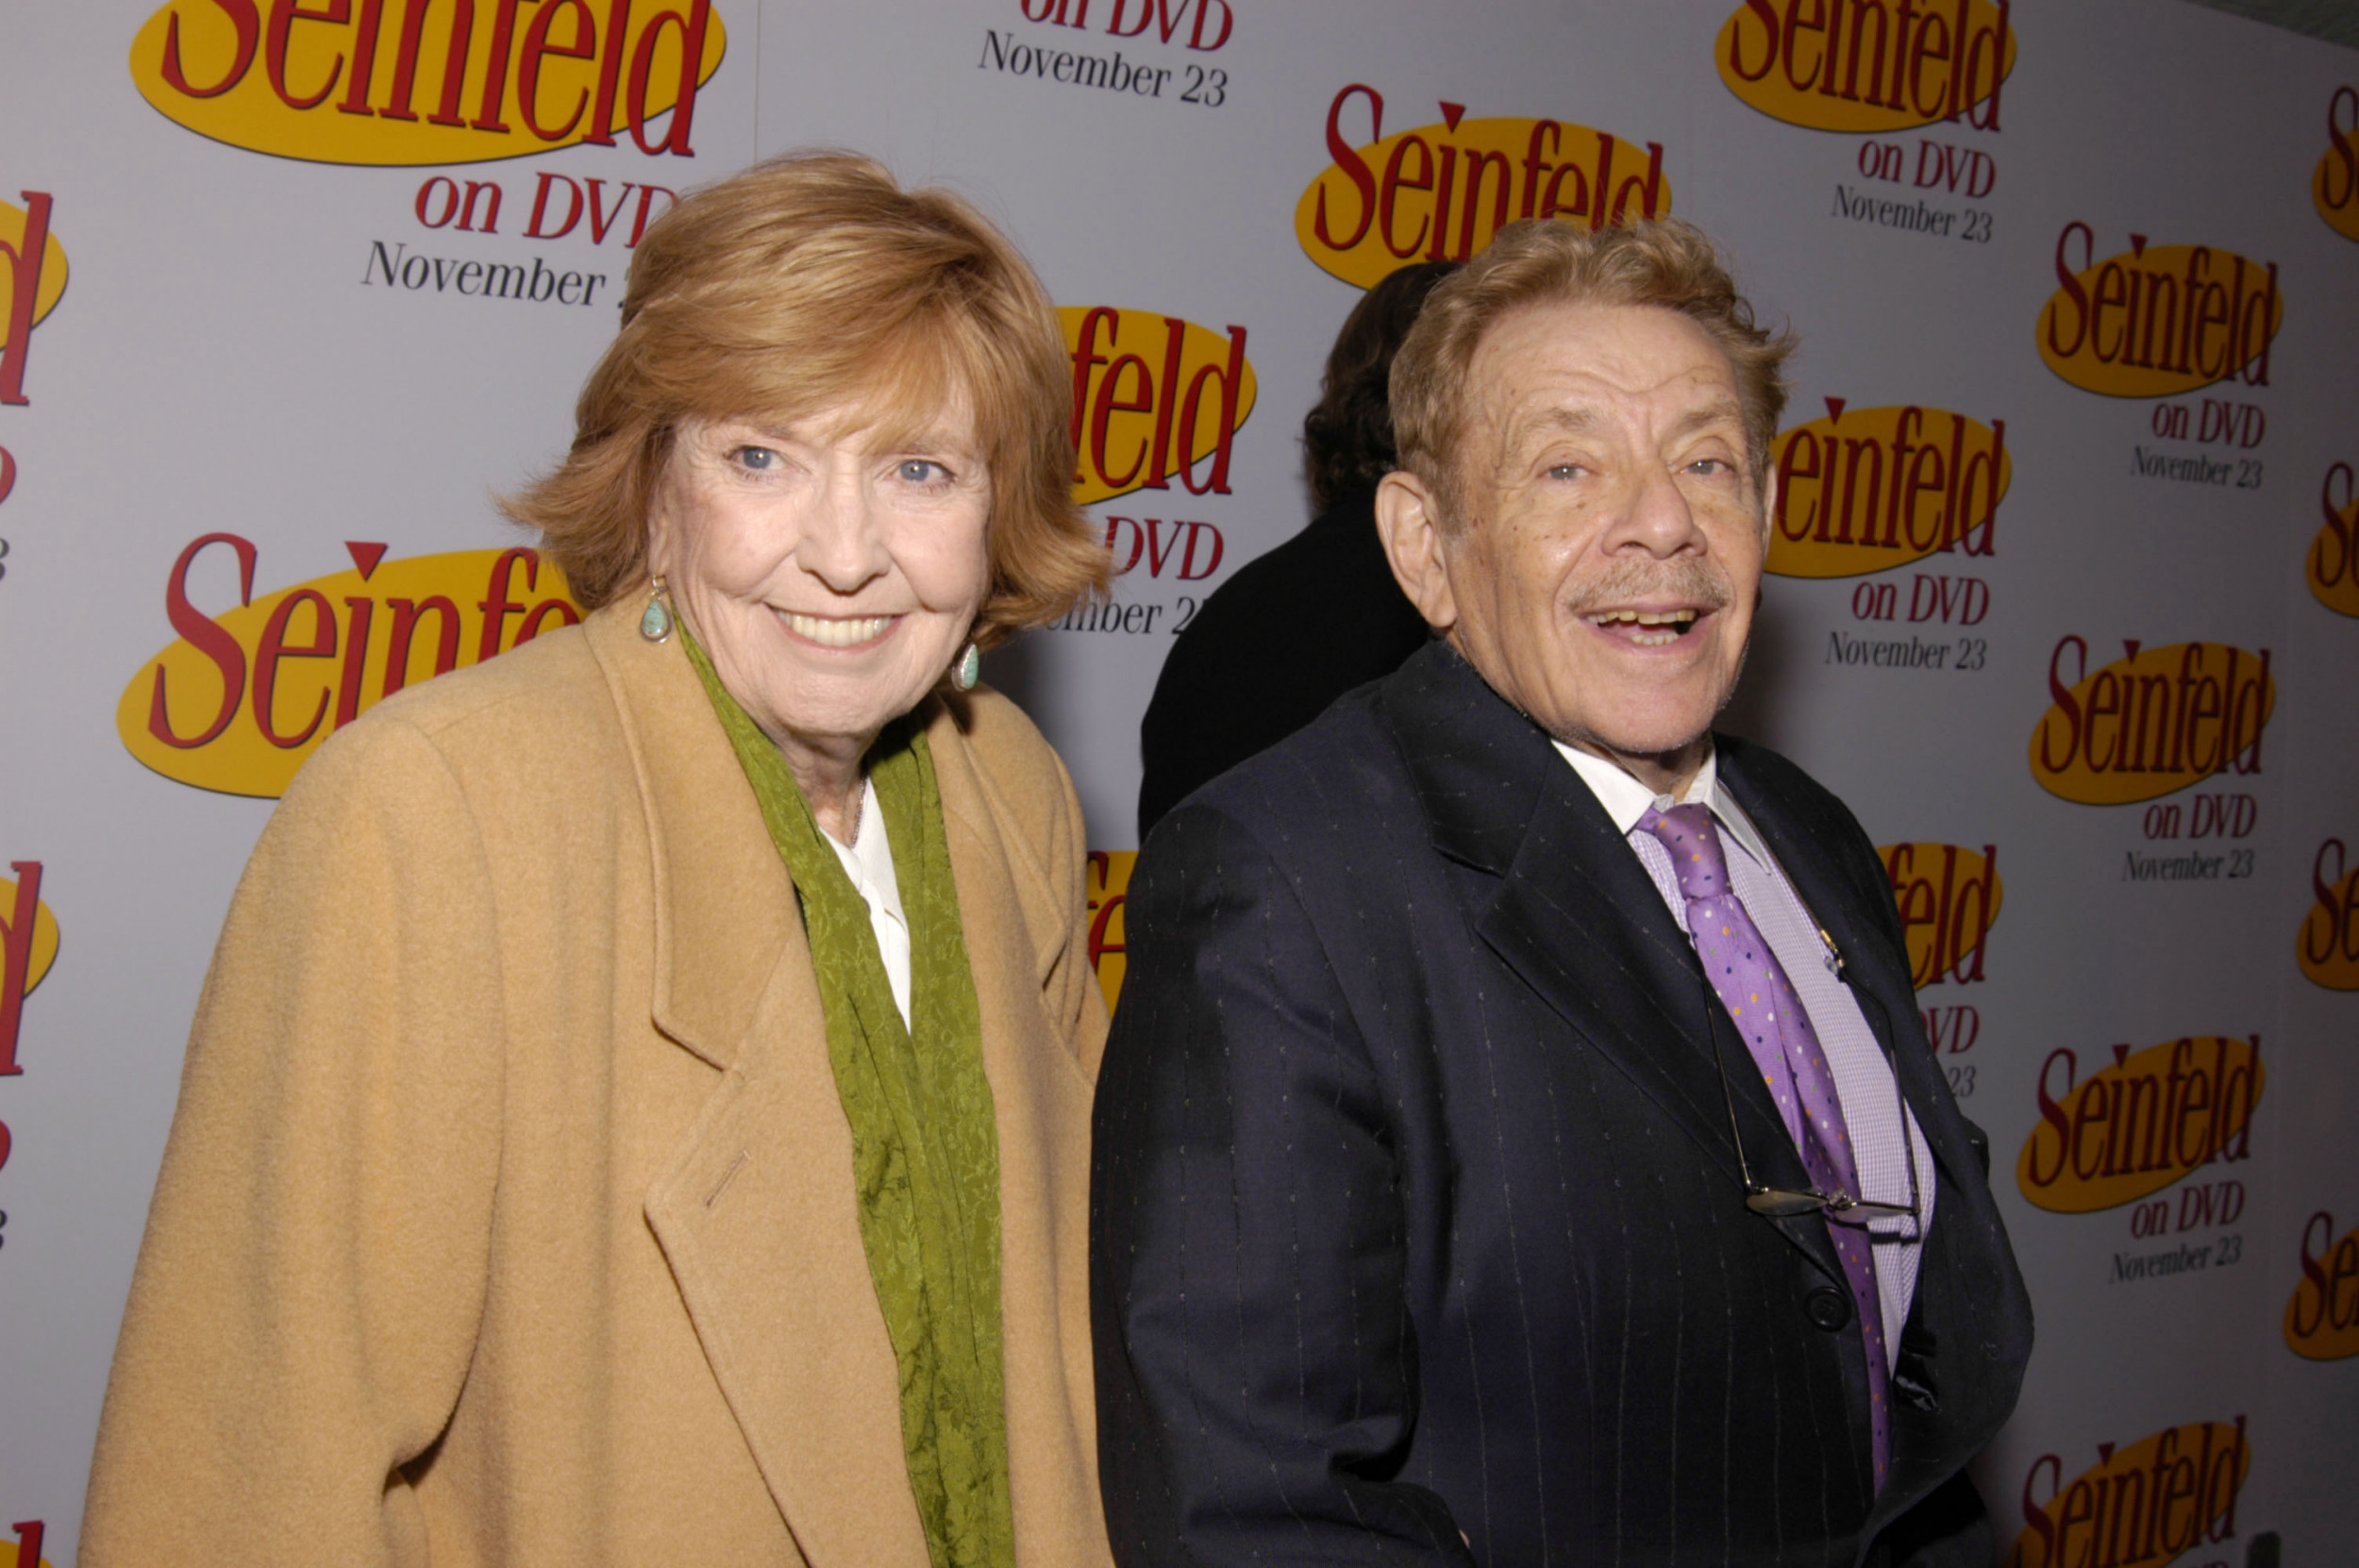 Seinfeld Fans Watch Out For These Hilarious Frank Costanza Moments During Tbs Tribute To Jerry Stiller